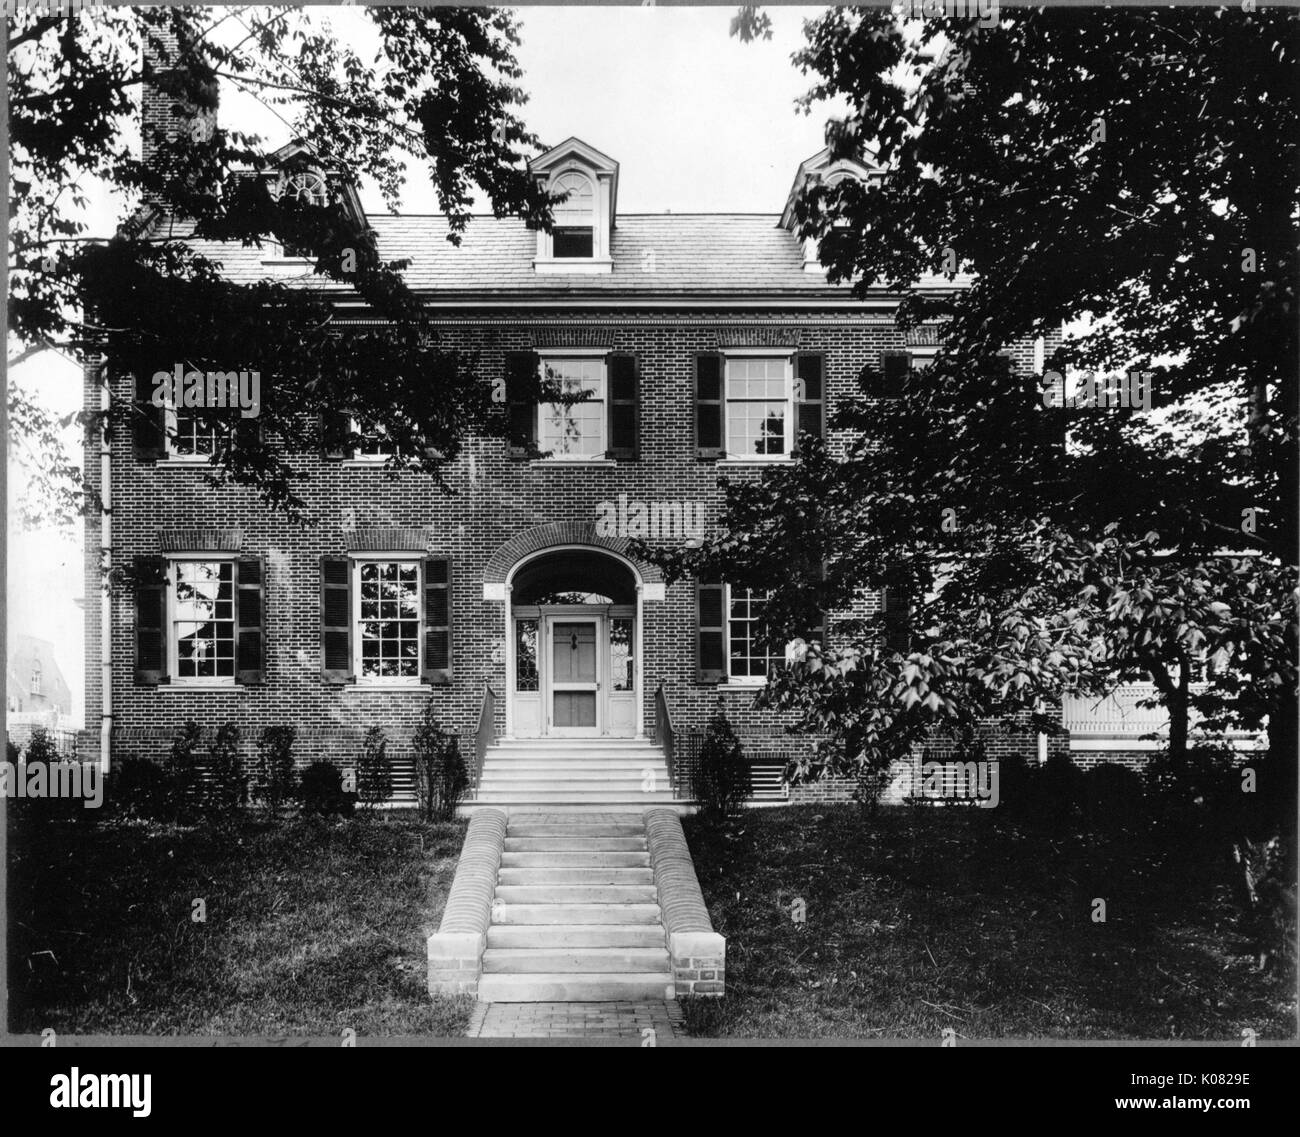 A large, brick home with a two small sets of stairs leading to an arched entryway, windows with shutters, dormer windows, an end chimney, and an obscured side porch (right) sits in a yard with trees and shrubbery in Baltimore, Maryland, 1910. This image is from a series documenting the construction and sale of homes in the Roland Park/Guilford neighborhood of Baltimore, a streetcar suburb and one of the first planned communities in the United States. Stock Photo